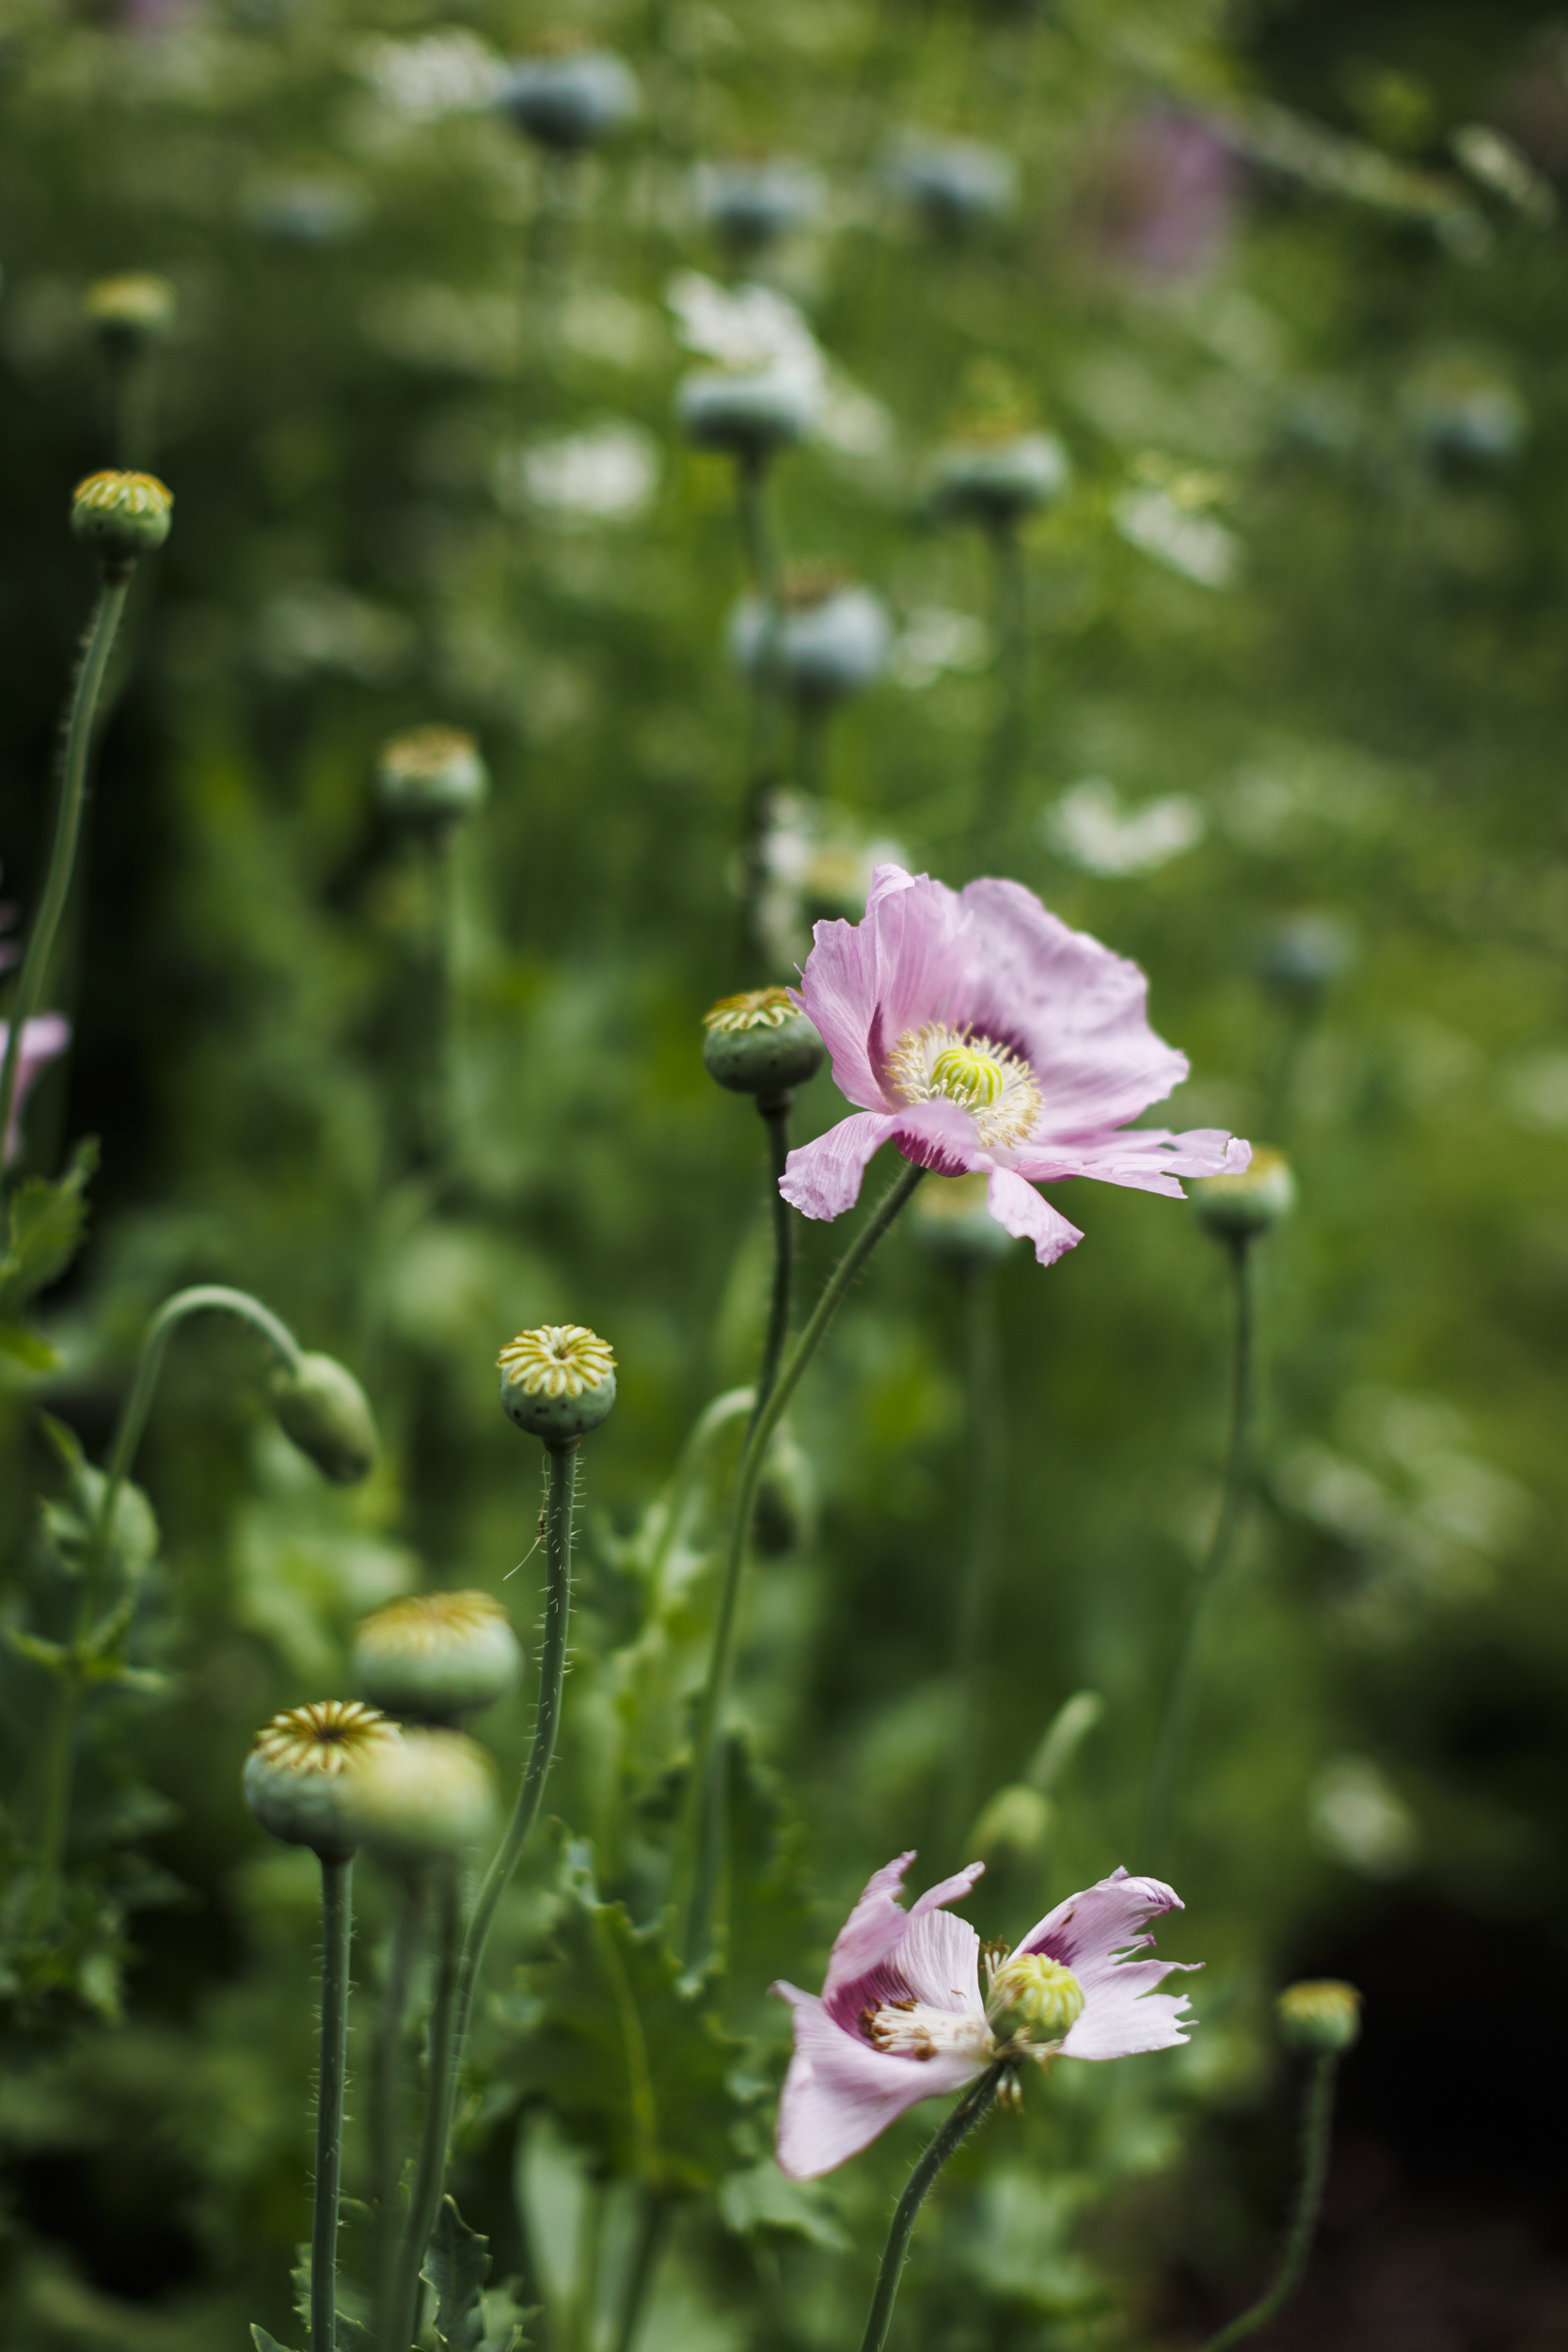 A detail of poppy flowers from Jamaica Kincaid's garden is pictured.